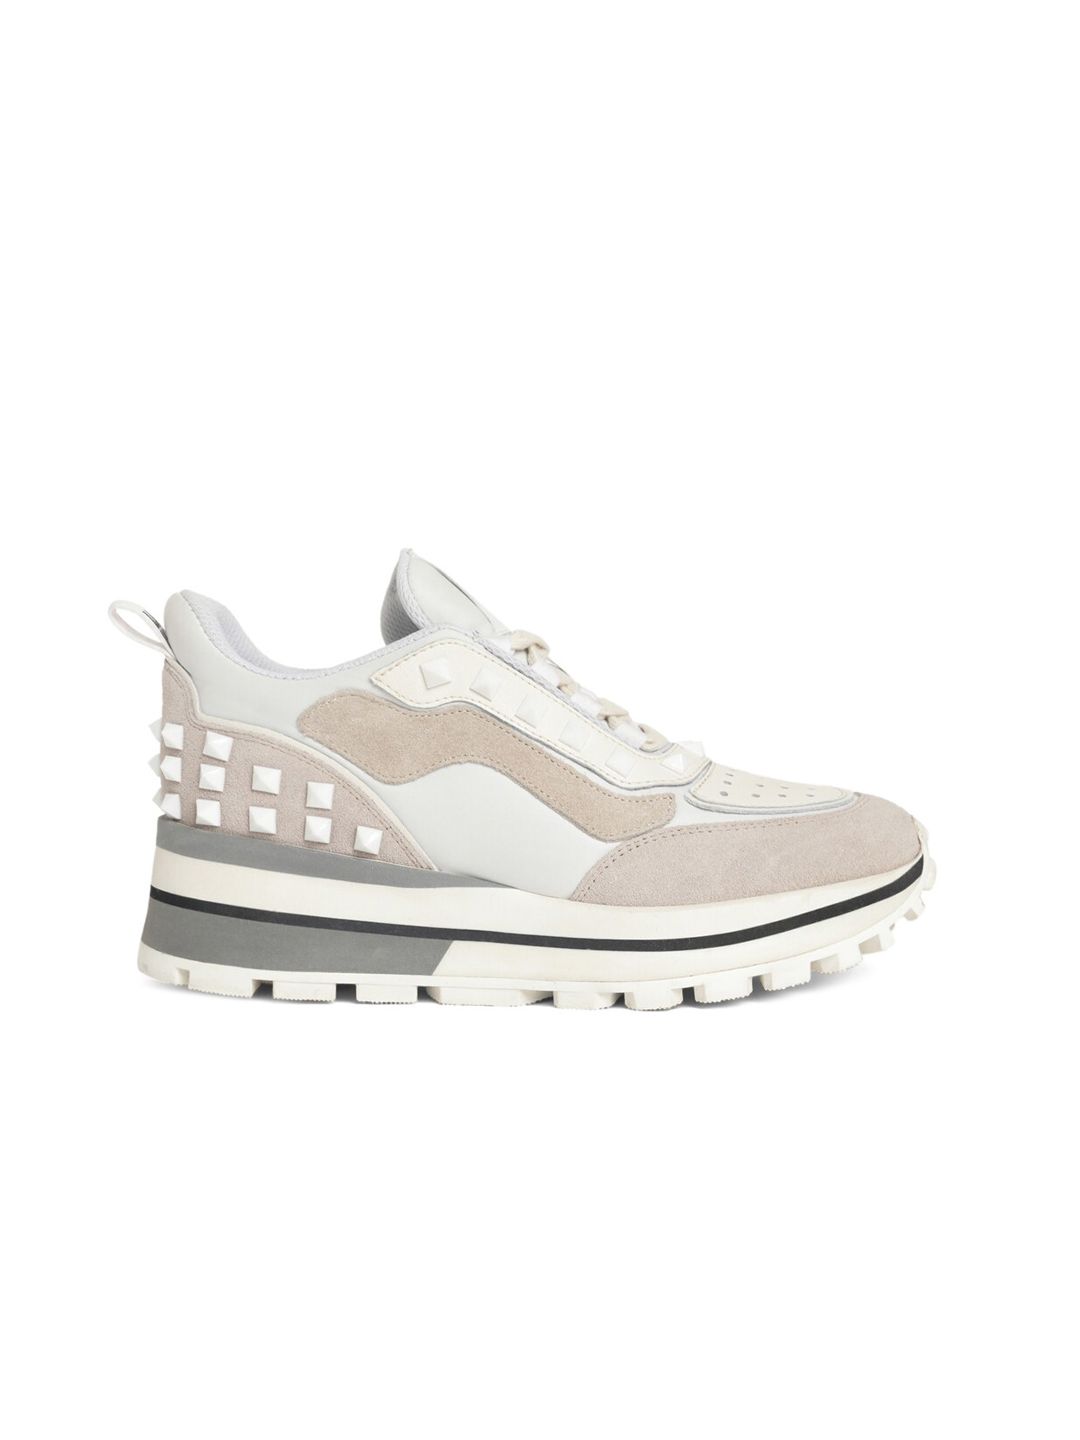 Saint G Women White & Beige Colourblocked Embellished Lightweight Leather Sneakers Price in India